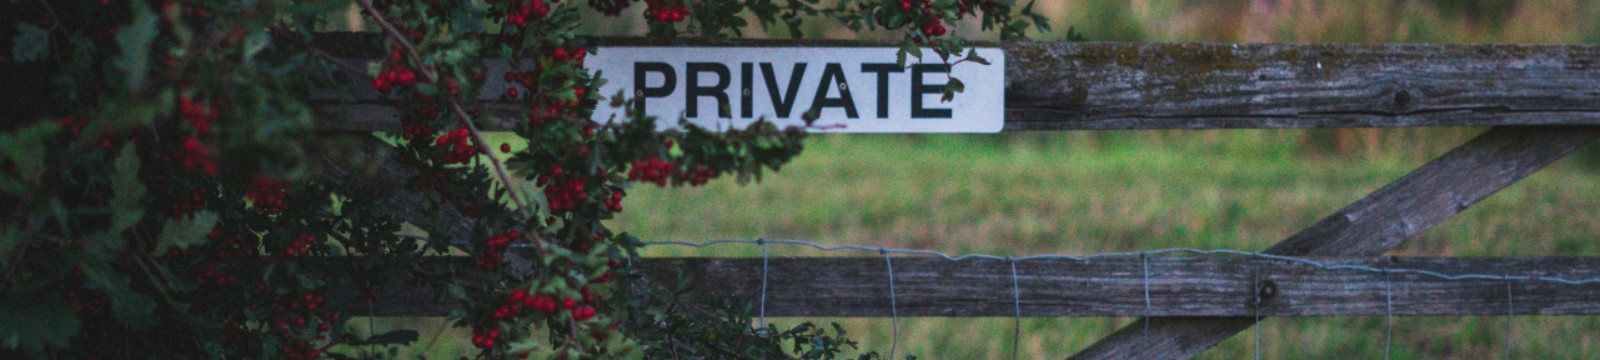 Stock photo of a private sign on old fence